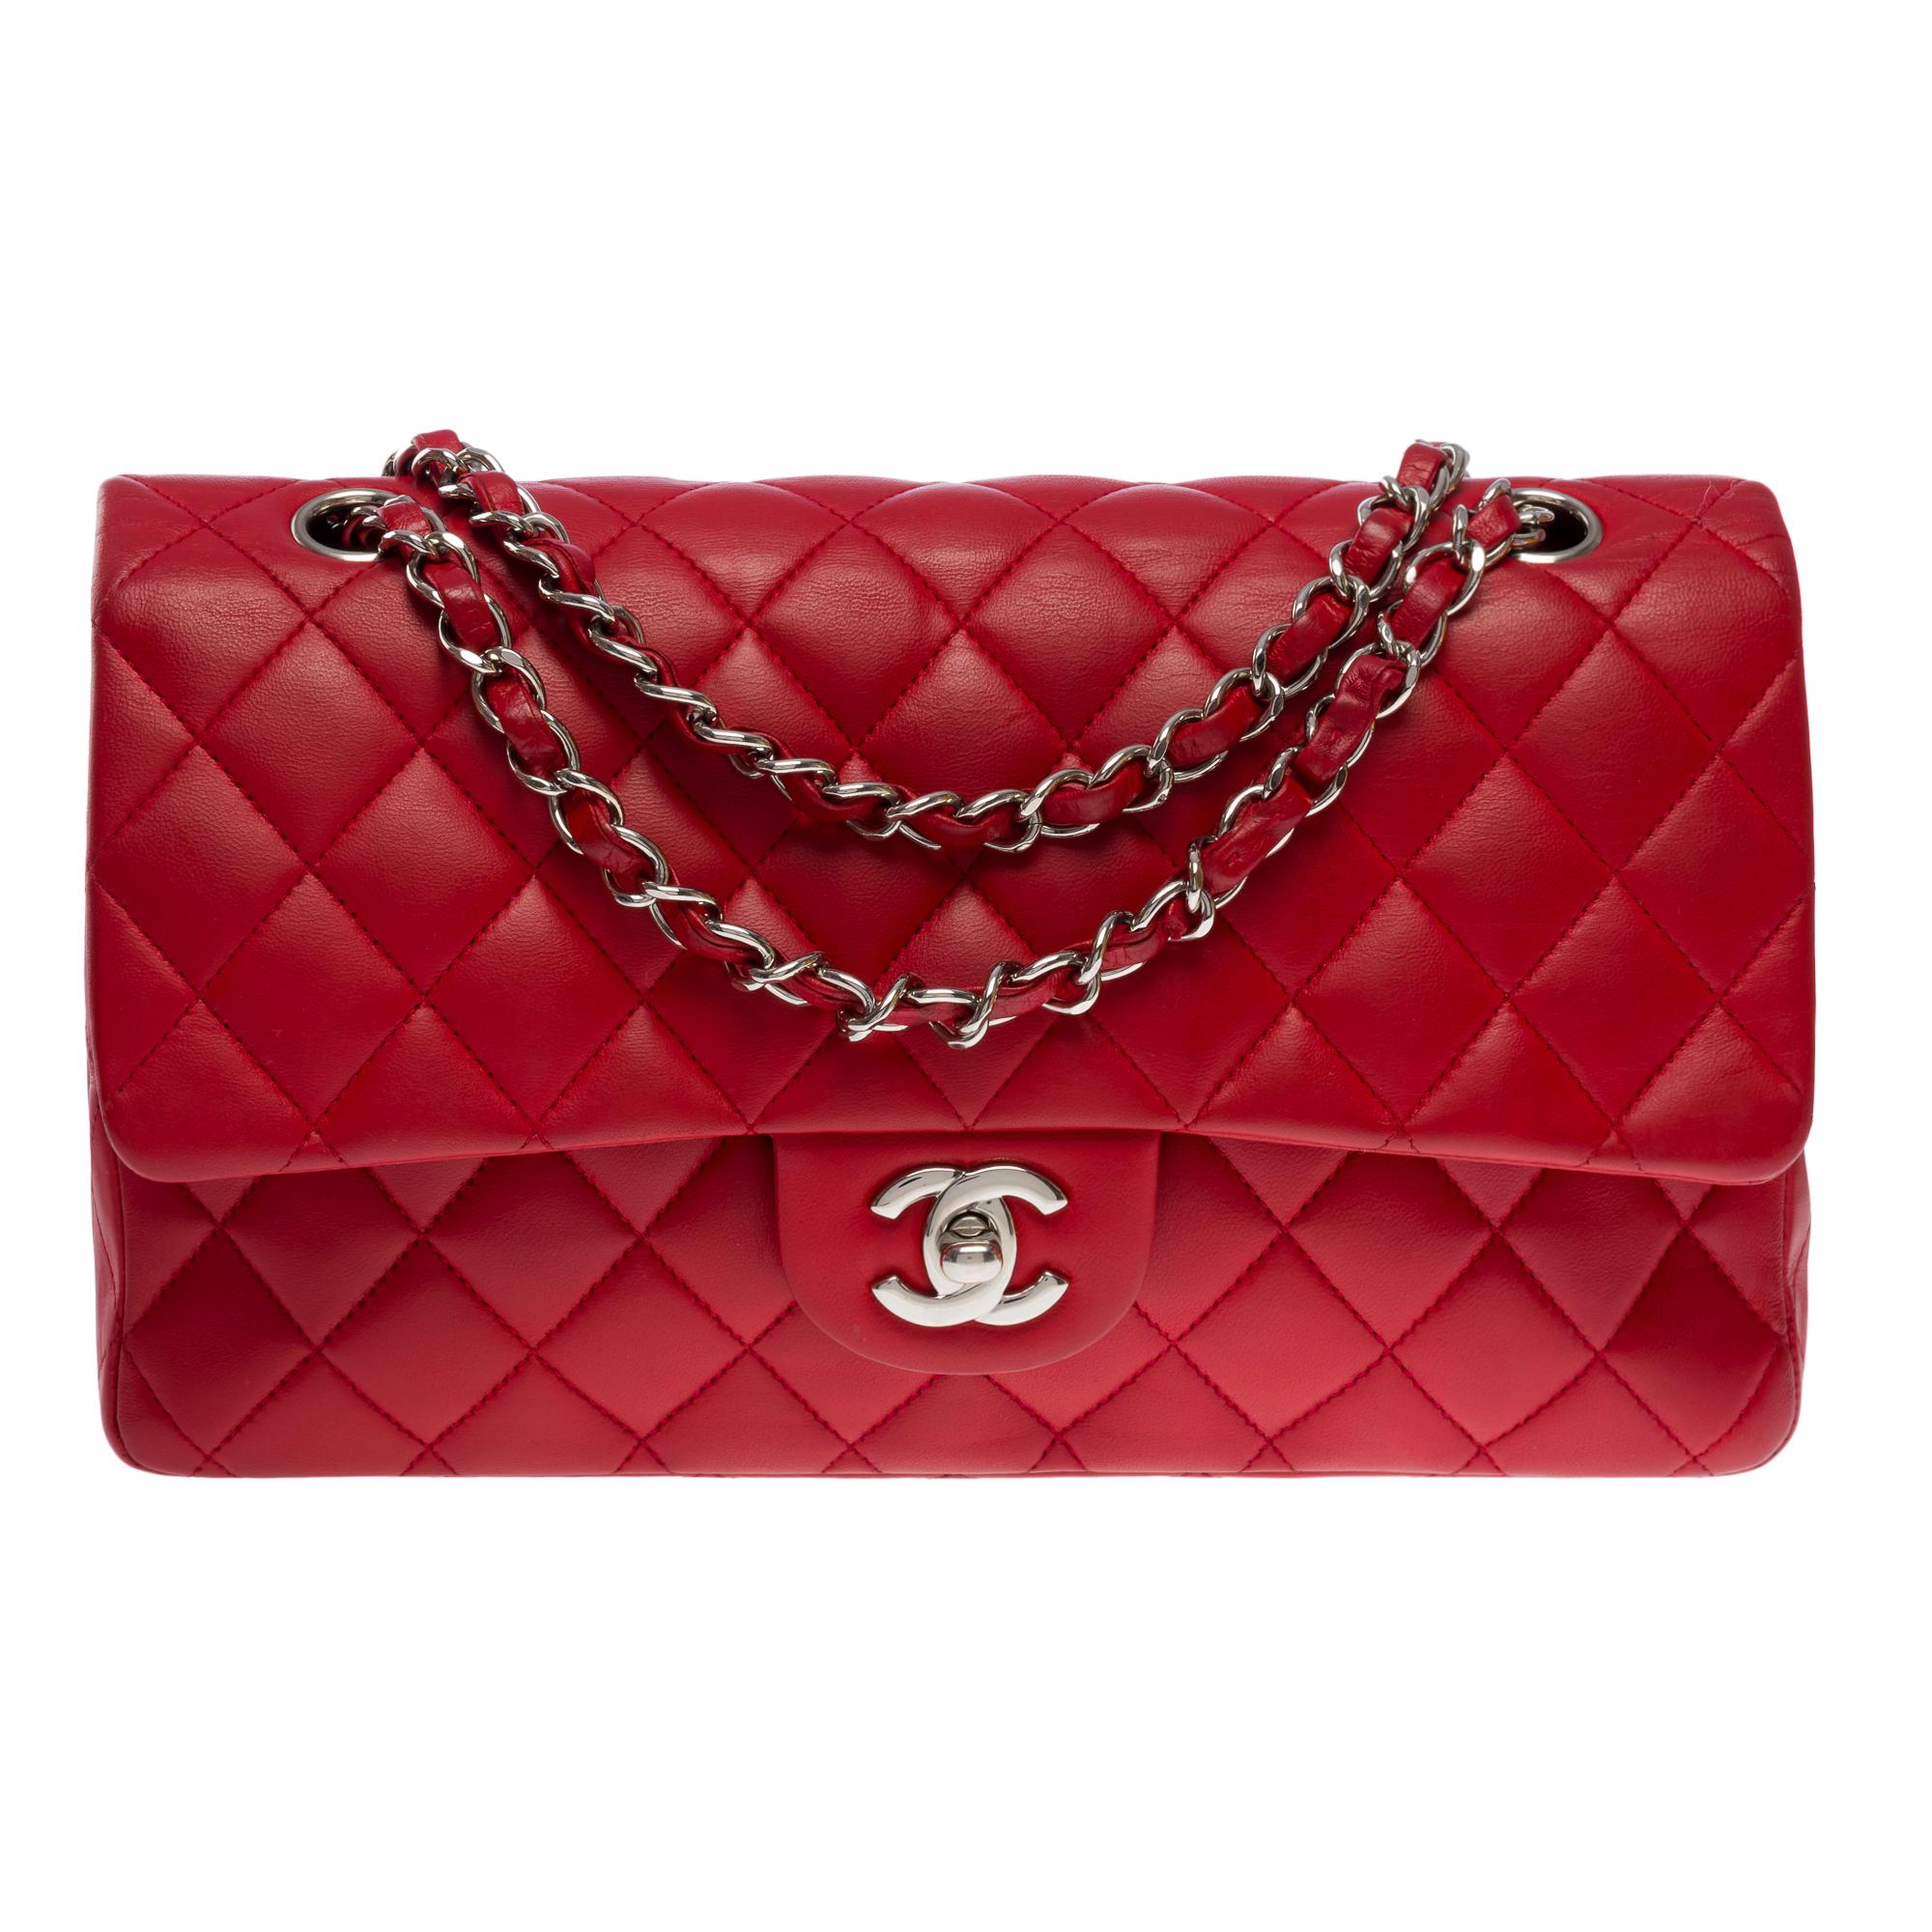 Exceptional Chanel Timeless medium double flap shoulder bag in red quilted lambskin leather, silver metal hardware, silver metal chain handle interlaced with red leather for shoulder and crossbody carry

Pocket on the back of the bag
Flap closure,